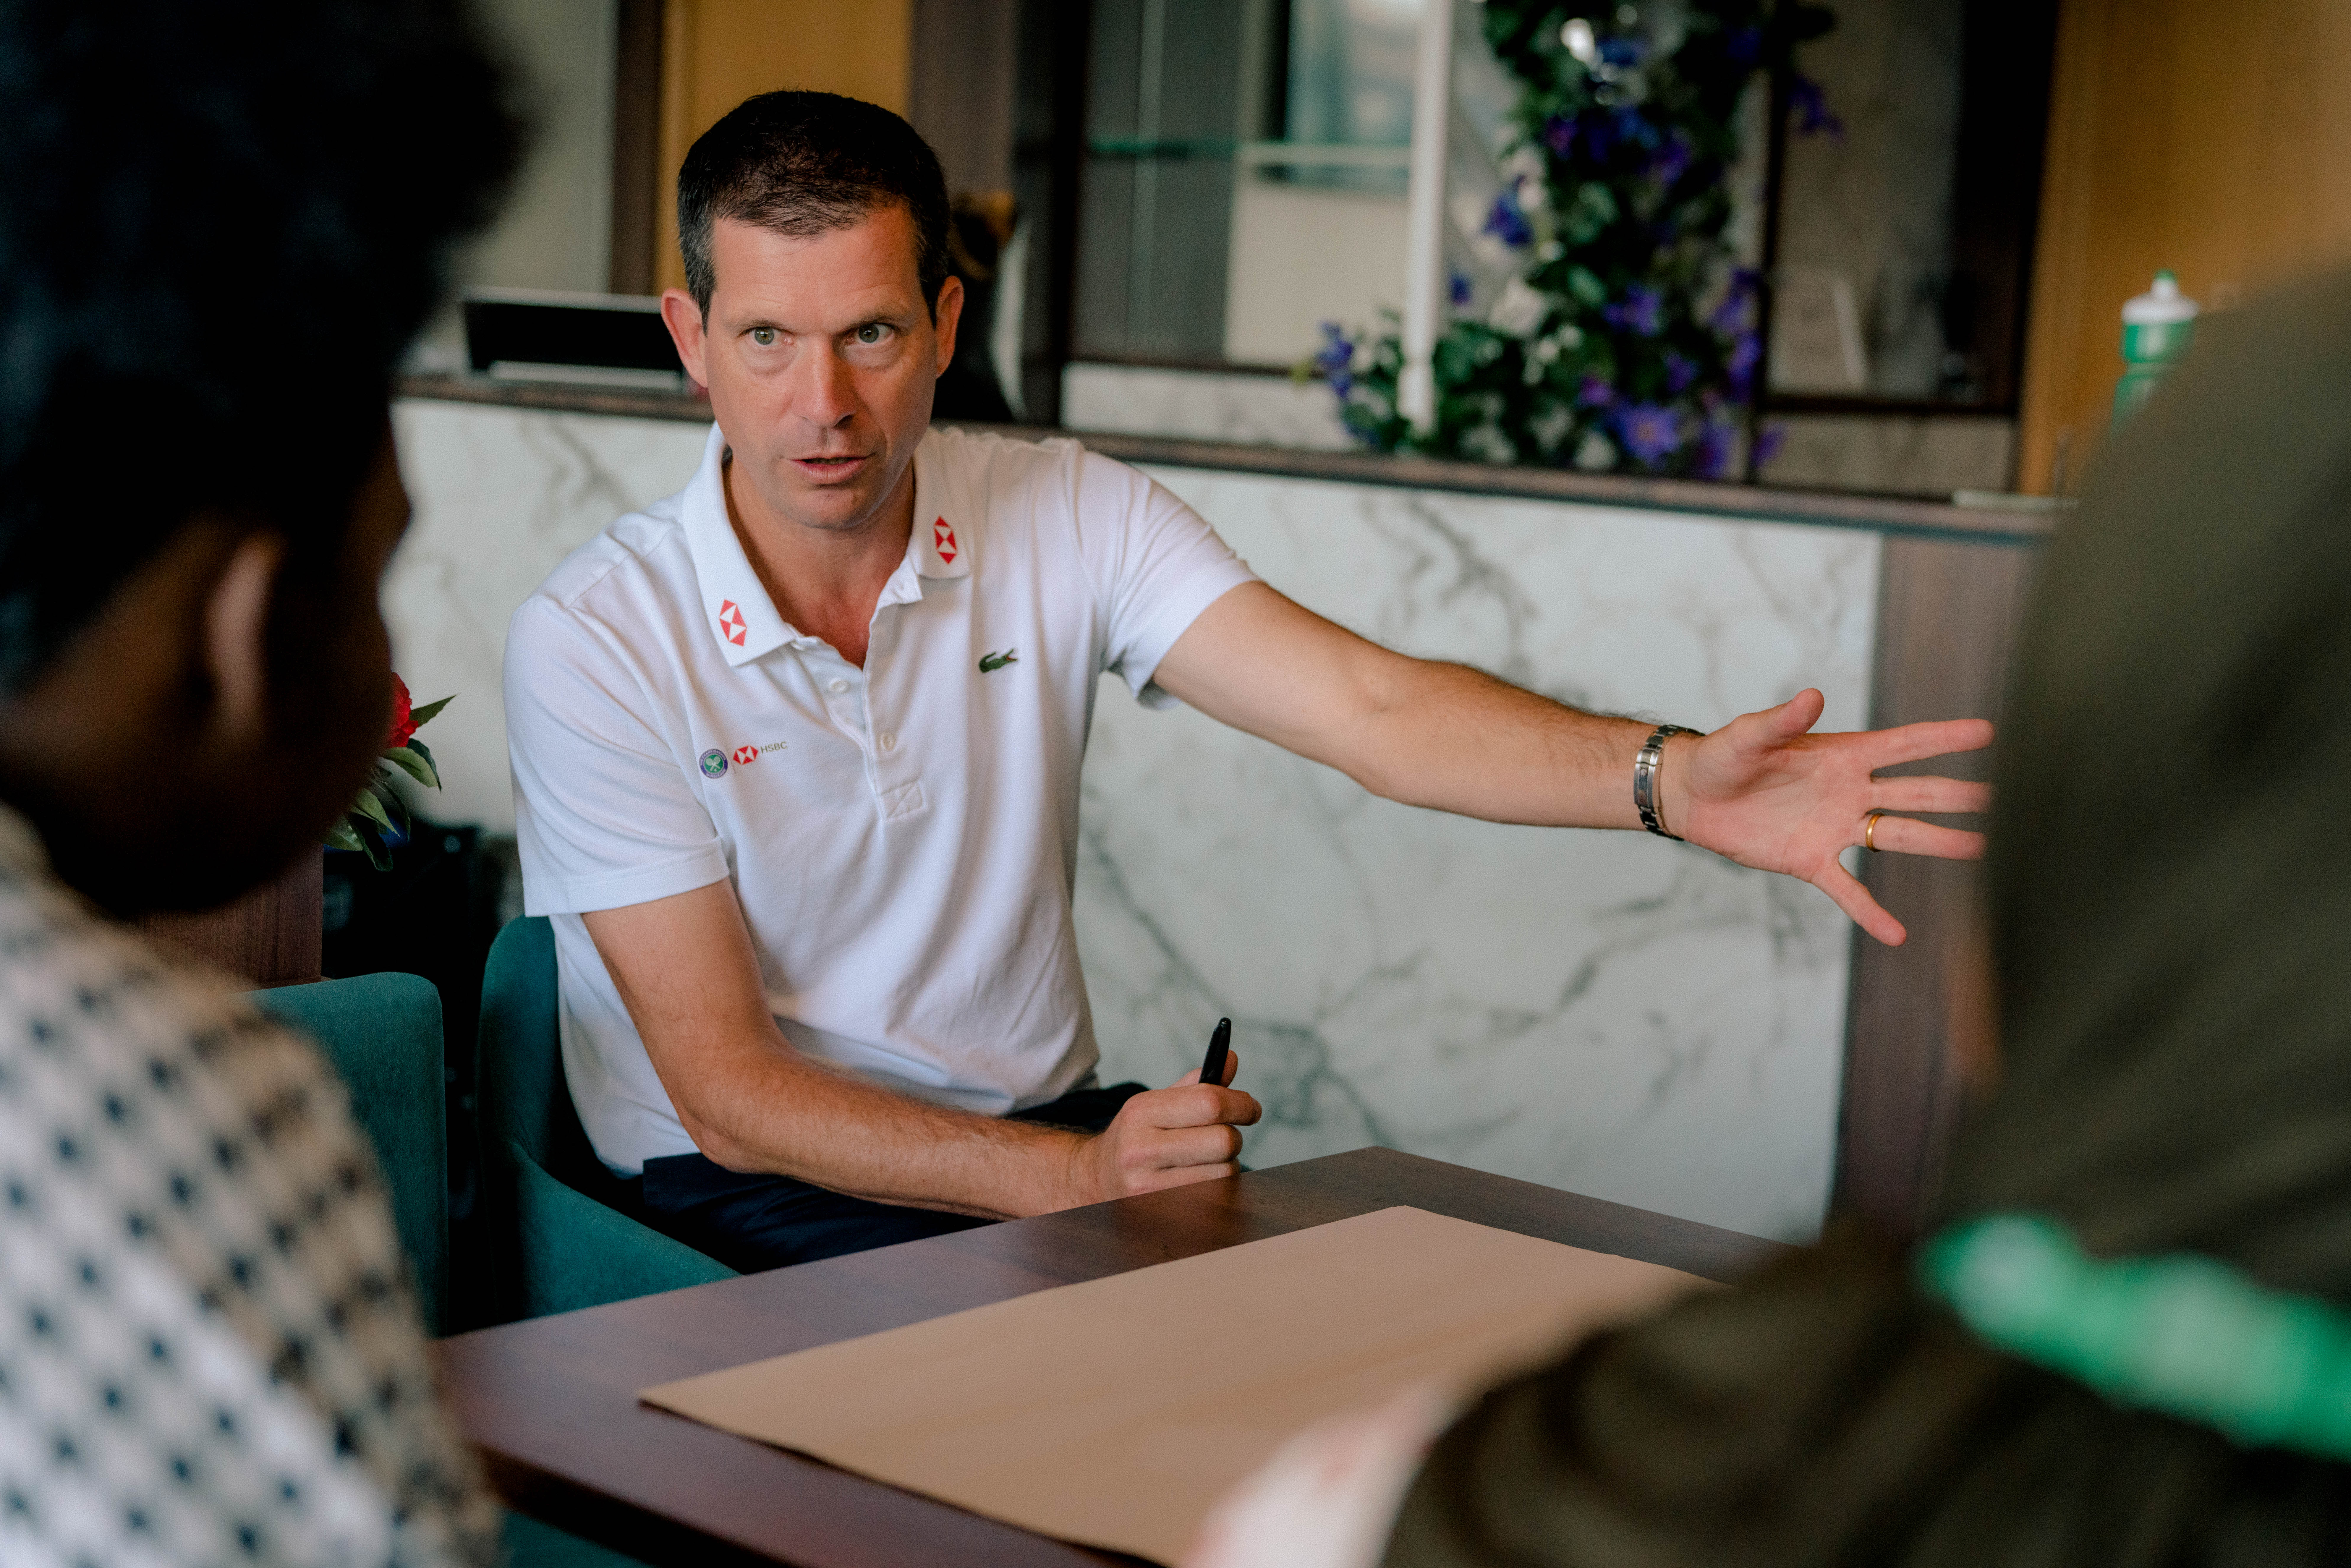 Tim Henman hosts HSBC’s World of Opportunity Programme at Wimbledon showcasing the different career opportunities available in sport beyond the court (HSBC)